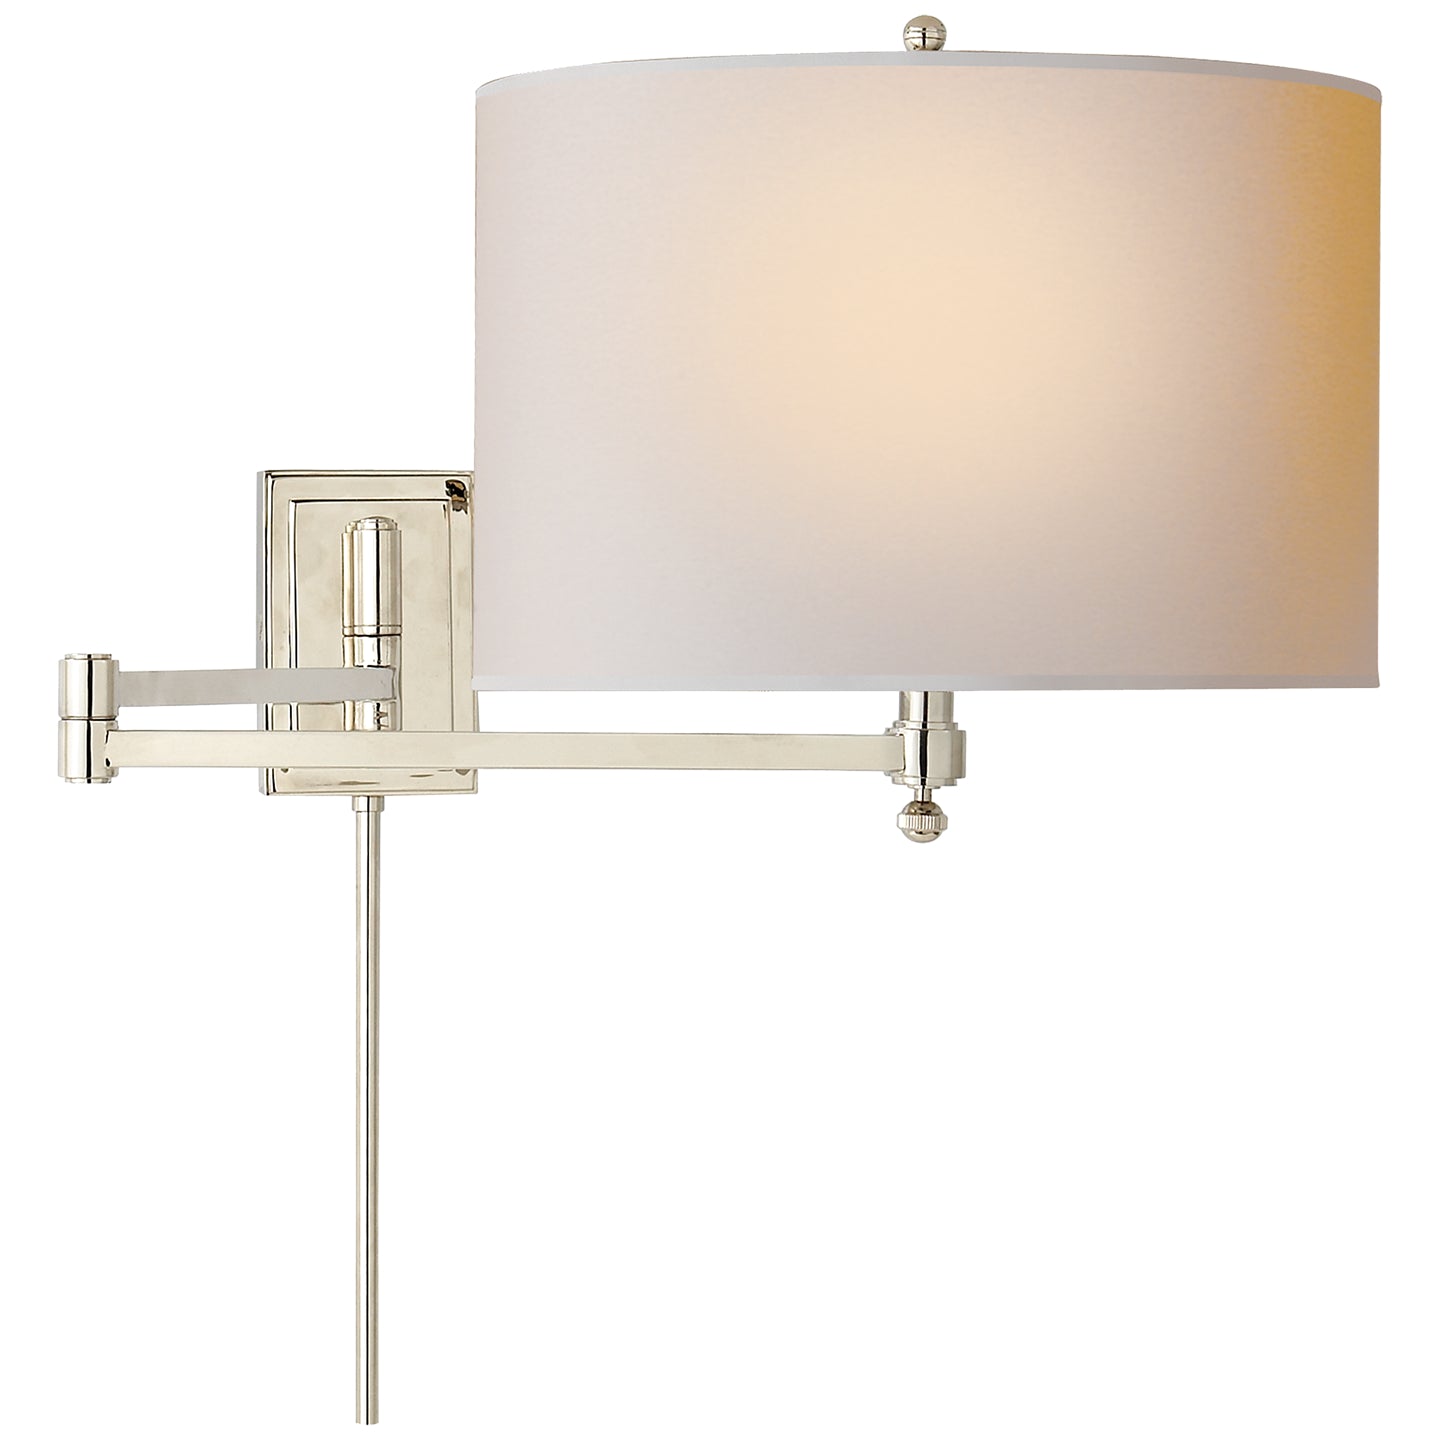 Load image into Gallery viewer, Visual Comfort Signature - TOB 2204PN-NP - One Light Wall Sconce - Hudson - Polished Nickel
